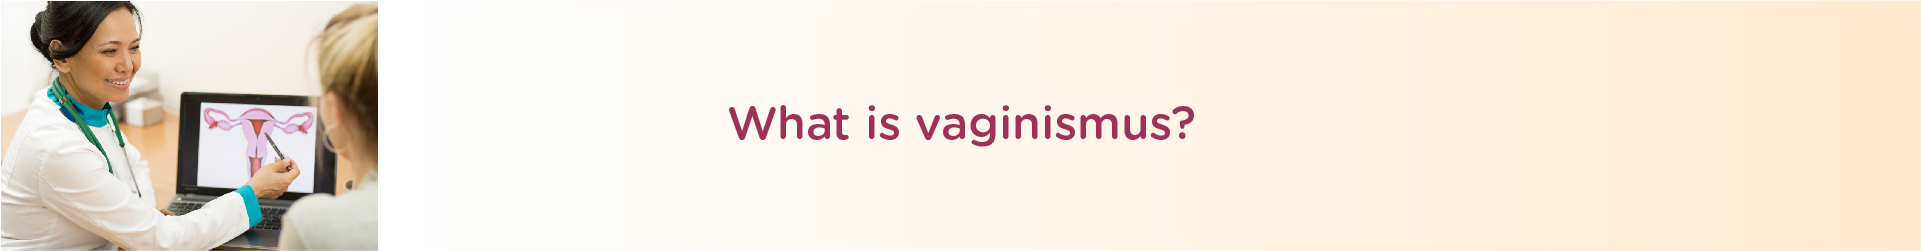 What Is Vaginismus?